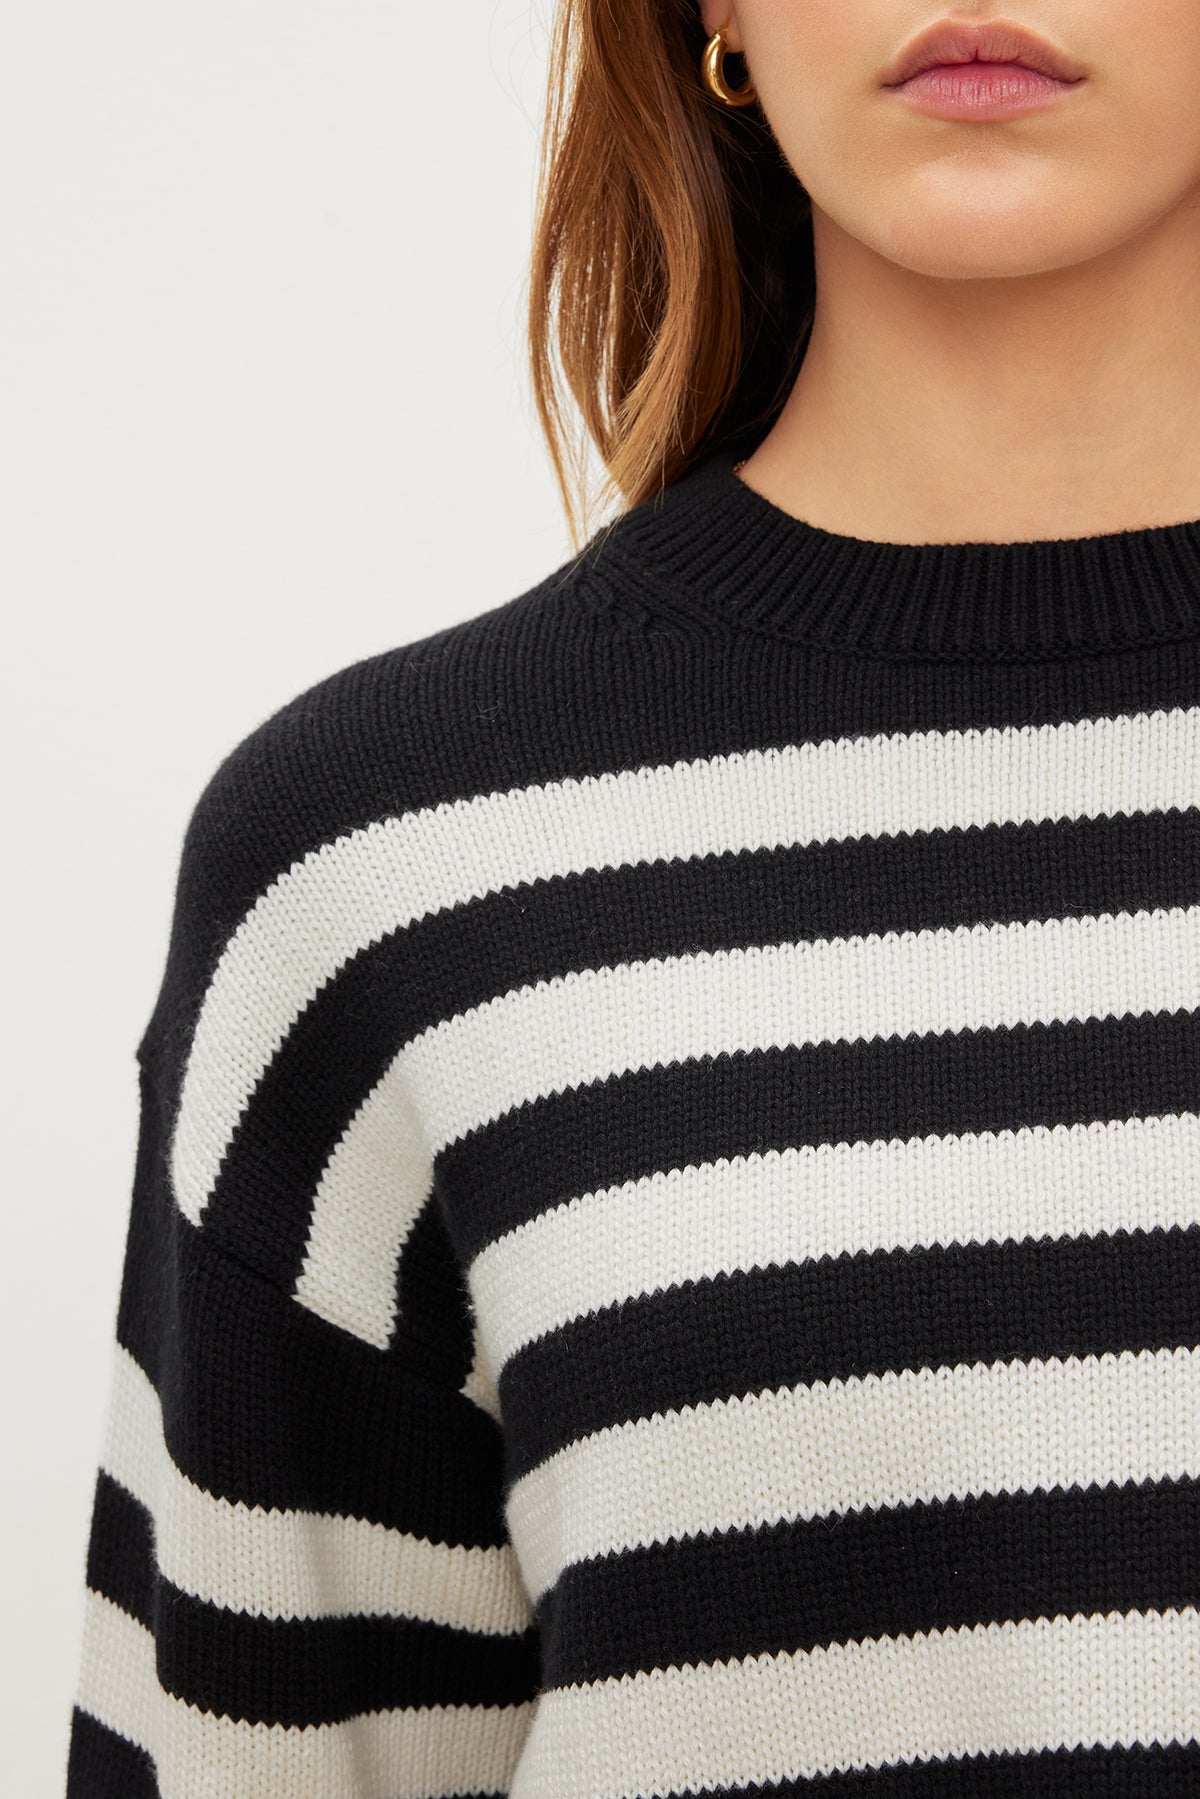   The model is wearing a Velvet by Graham & Spencer LEX STRIPED CREW NECK SWEATER. 